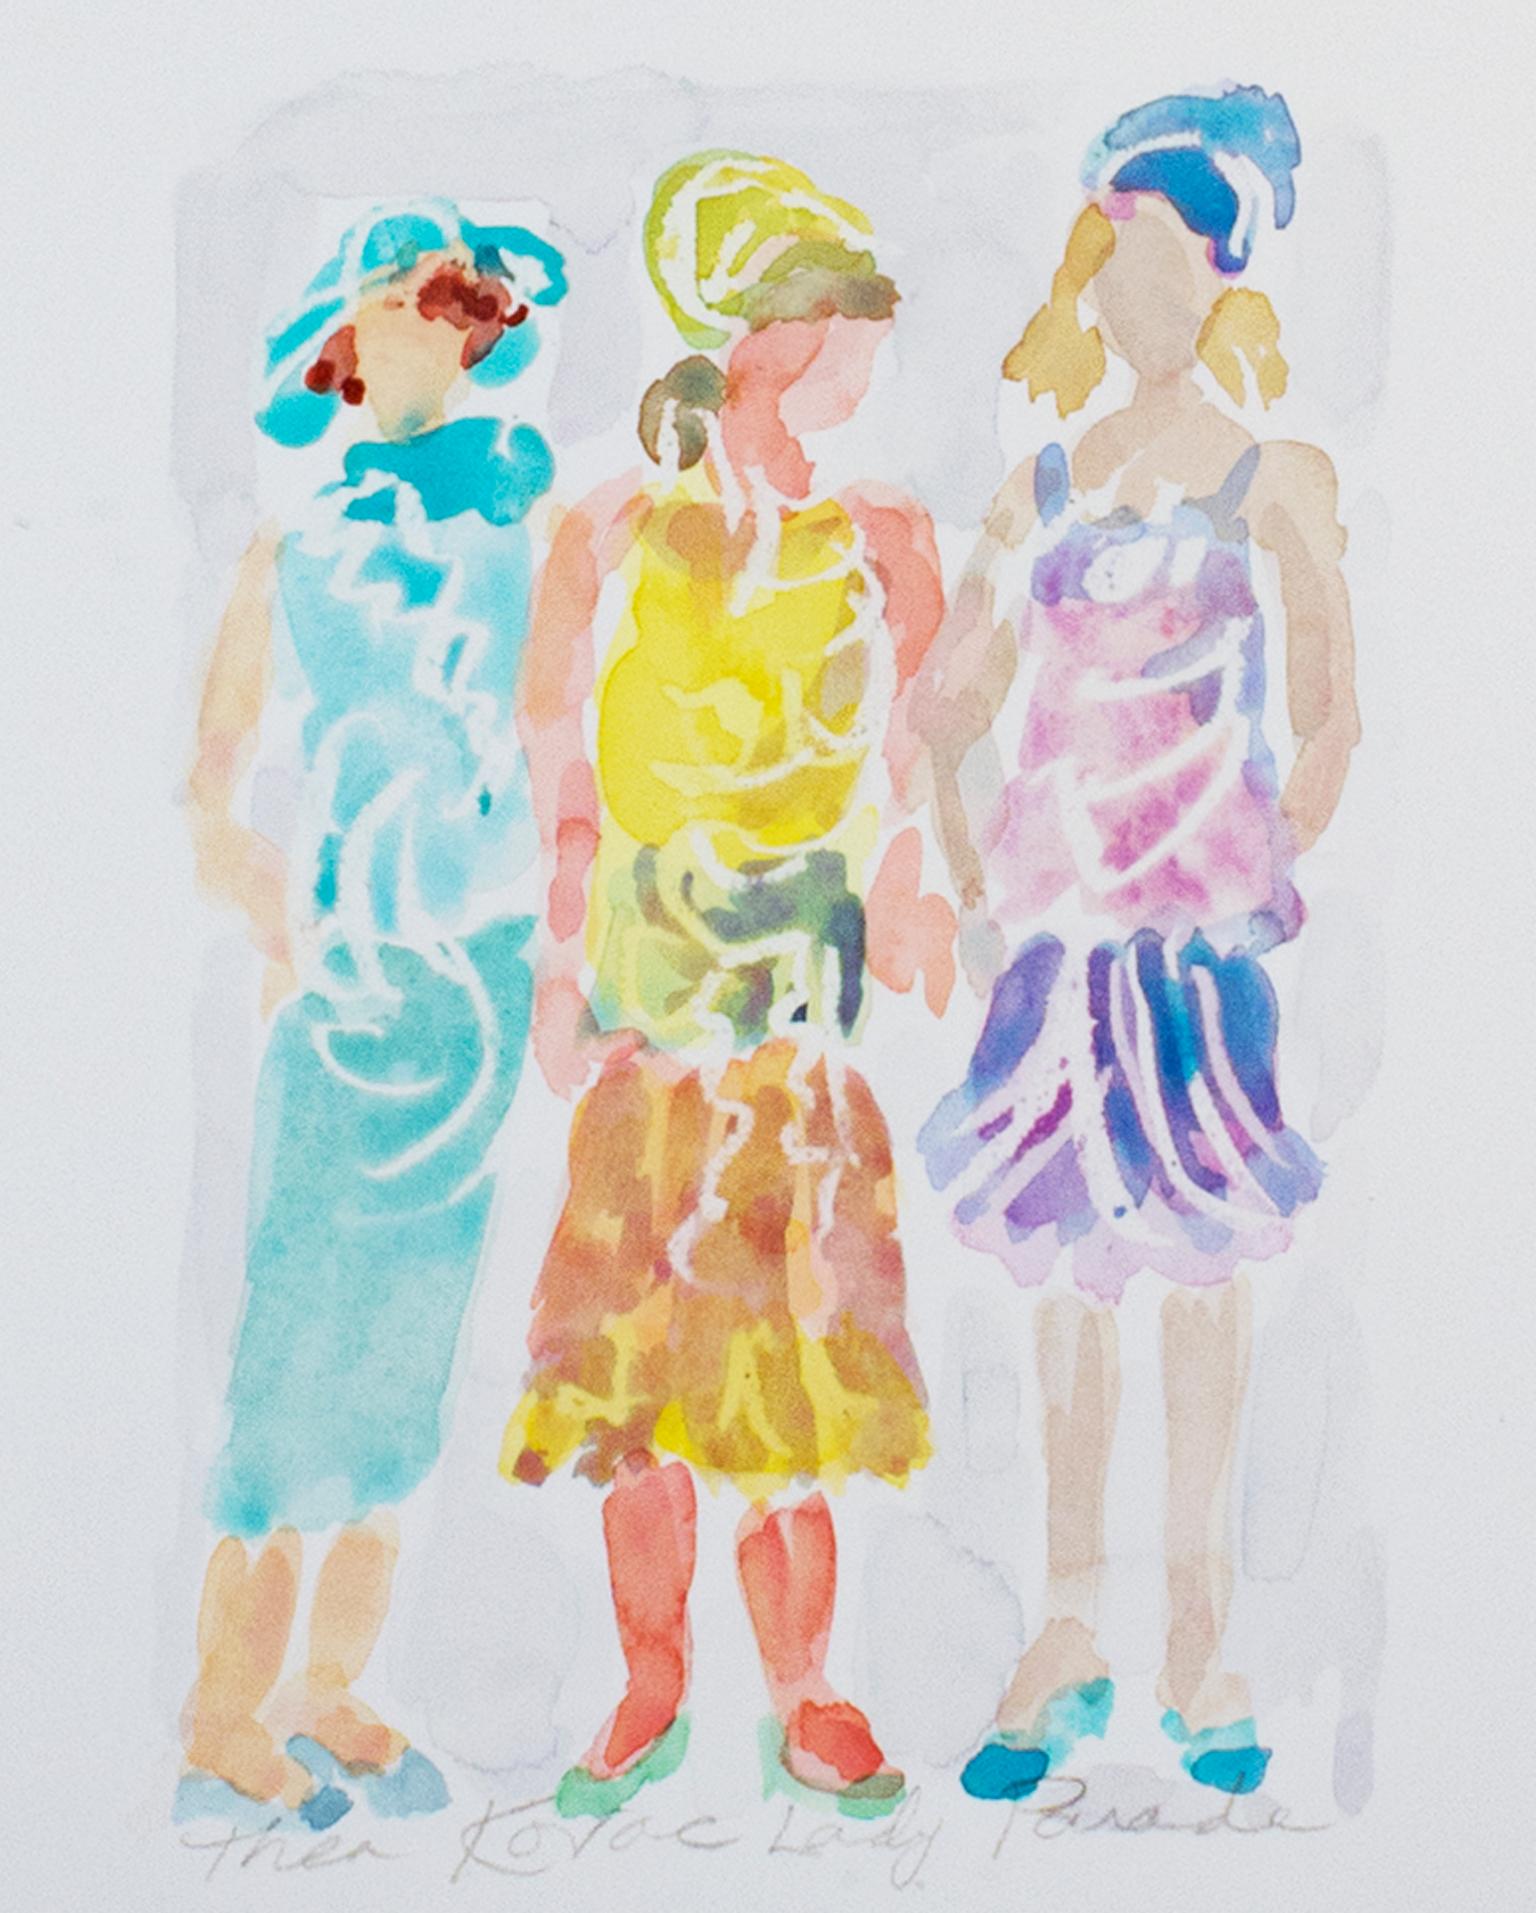 "Lady Parade II" watercolor by Thea Kovac. The artist signed and titled the piece below the image. The piece features three women standing in brightly colored dresses. 

8 3/4" x 6" art
19" x 15 1/4" frame

THEA KOVAC is a visual artist, writer,